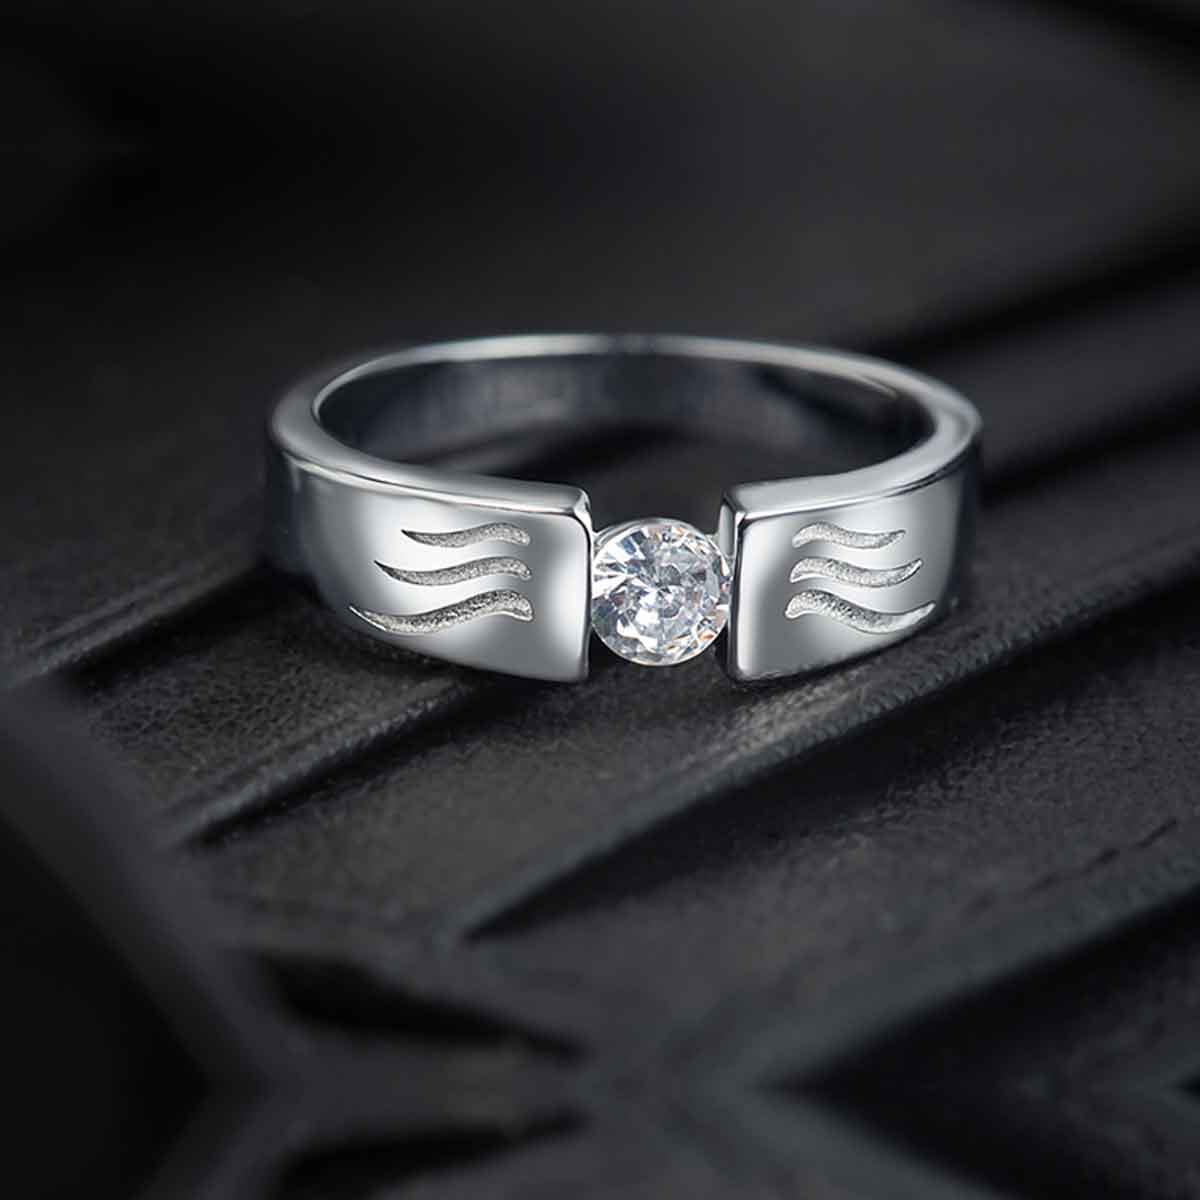 This sterling silver band features a unique wave design engraved with sparkling round zirconia, making it a stylish and versatile accessory for everyday wear. Crafted with a rhodium finish, it is a thoughtful gift option for men.